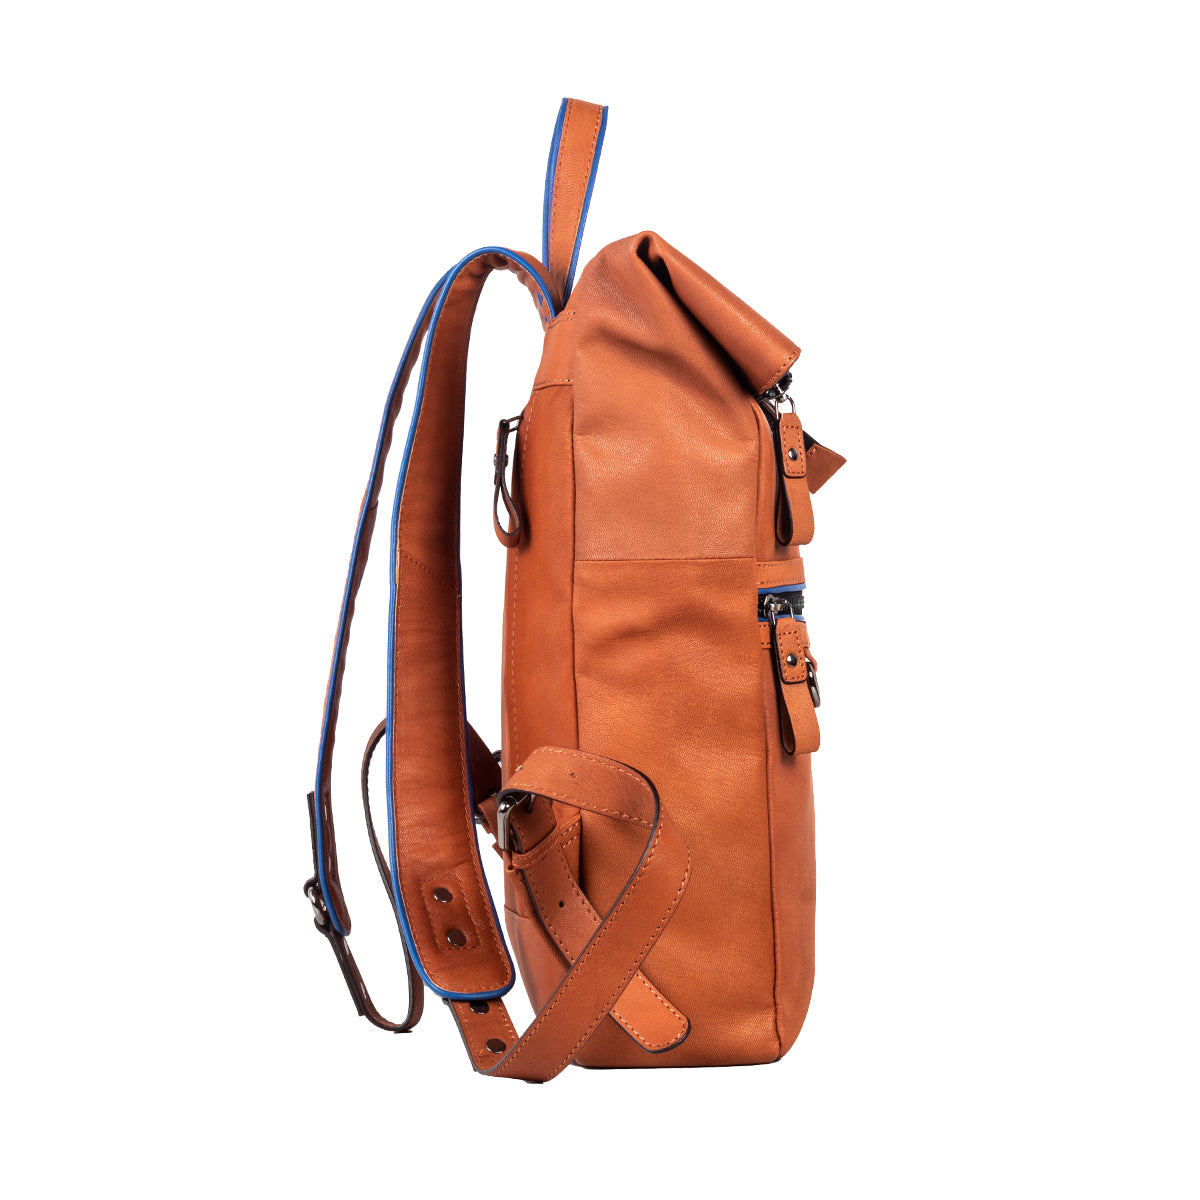 Roll top backpack Leonore 